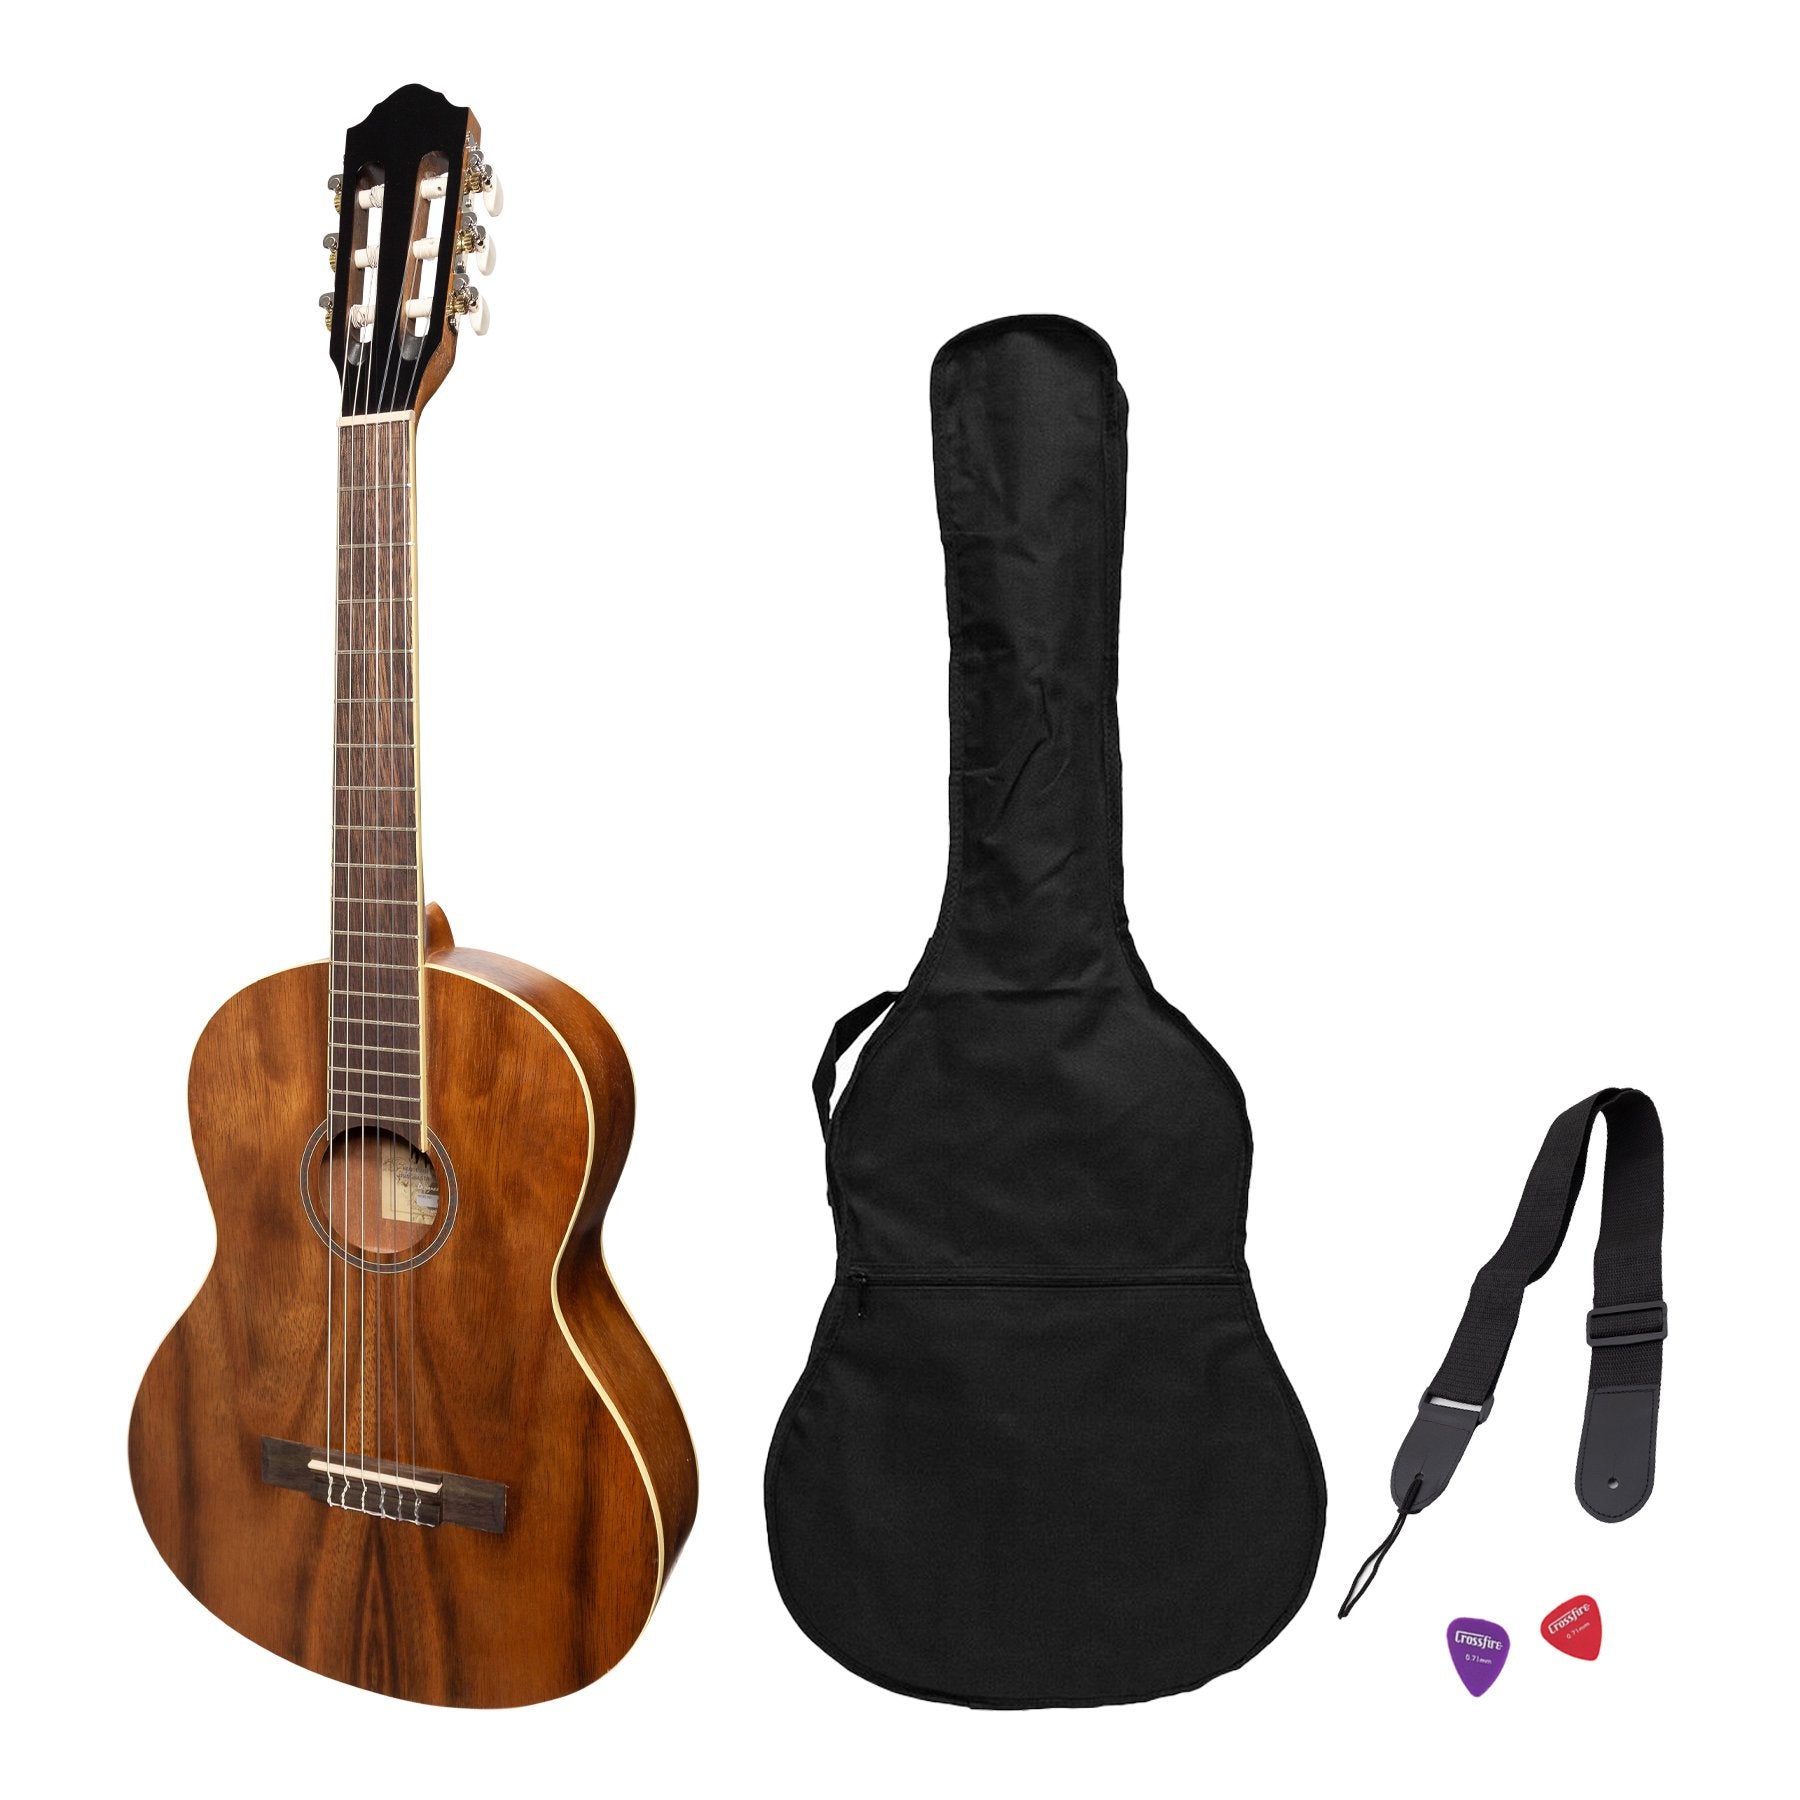 Martinez 'Slim Jim' 3/4 Size Student Classical Guitar Pack with Built In Tuner (Rosewood)-MP-SJ34T-RWD